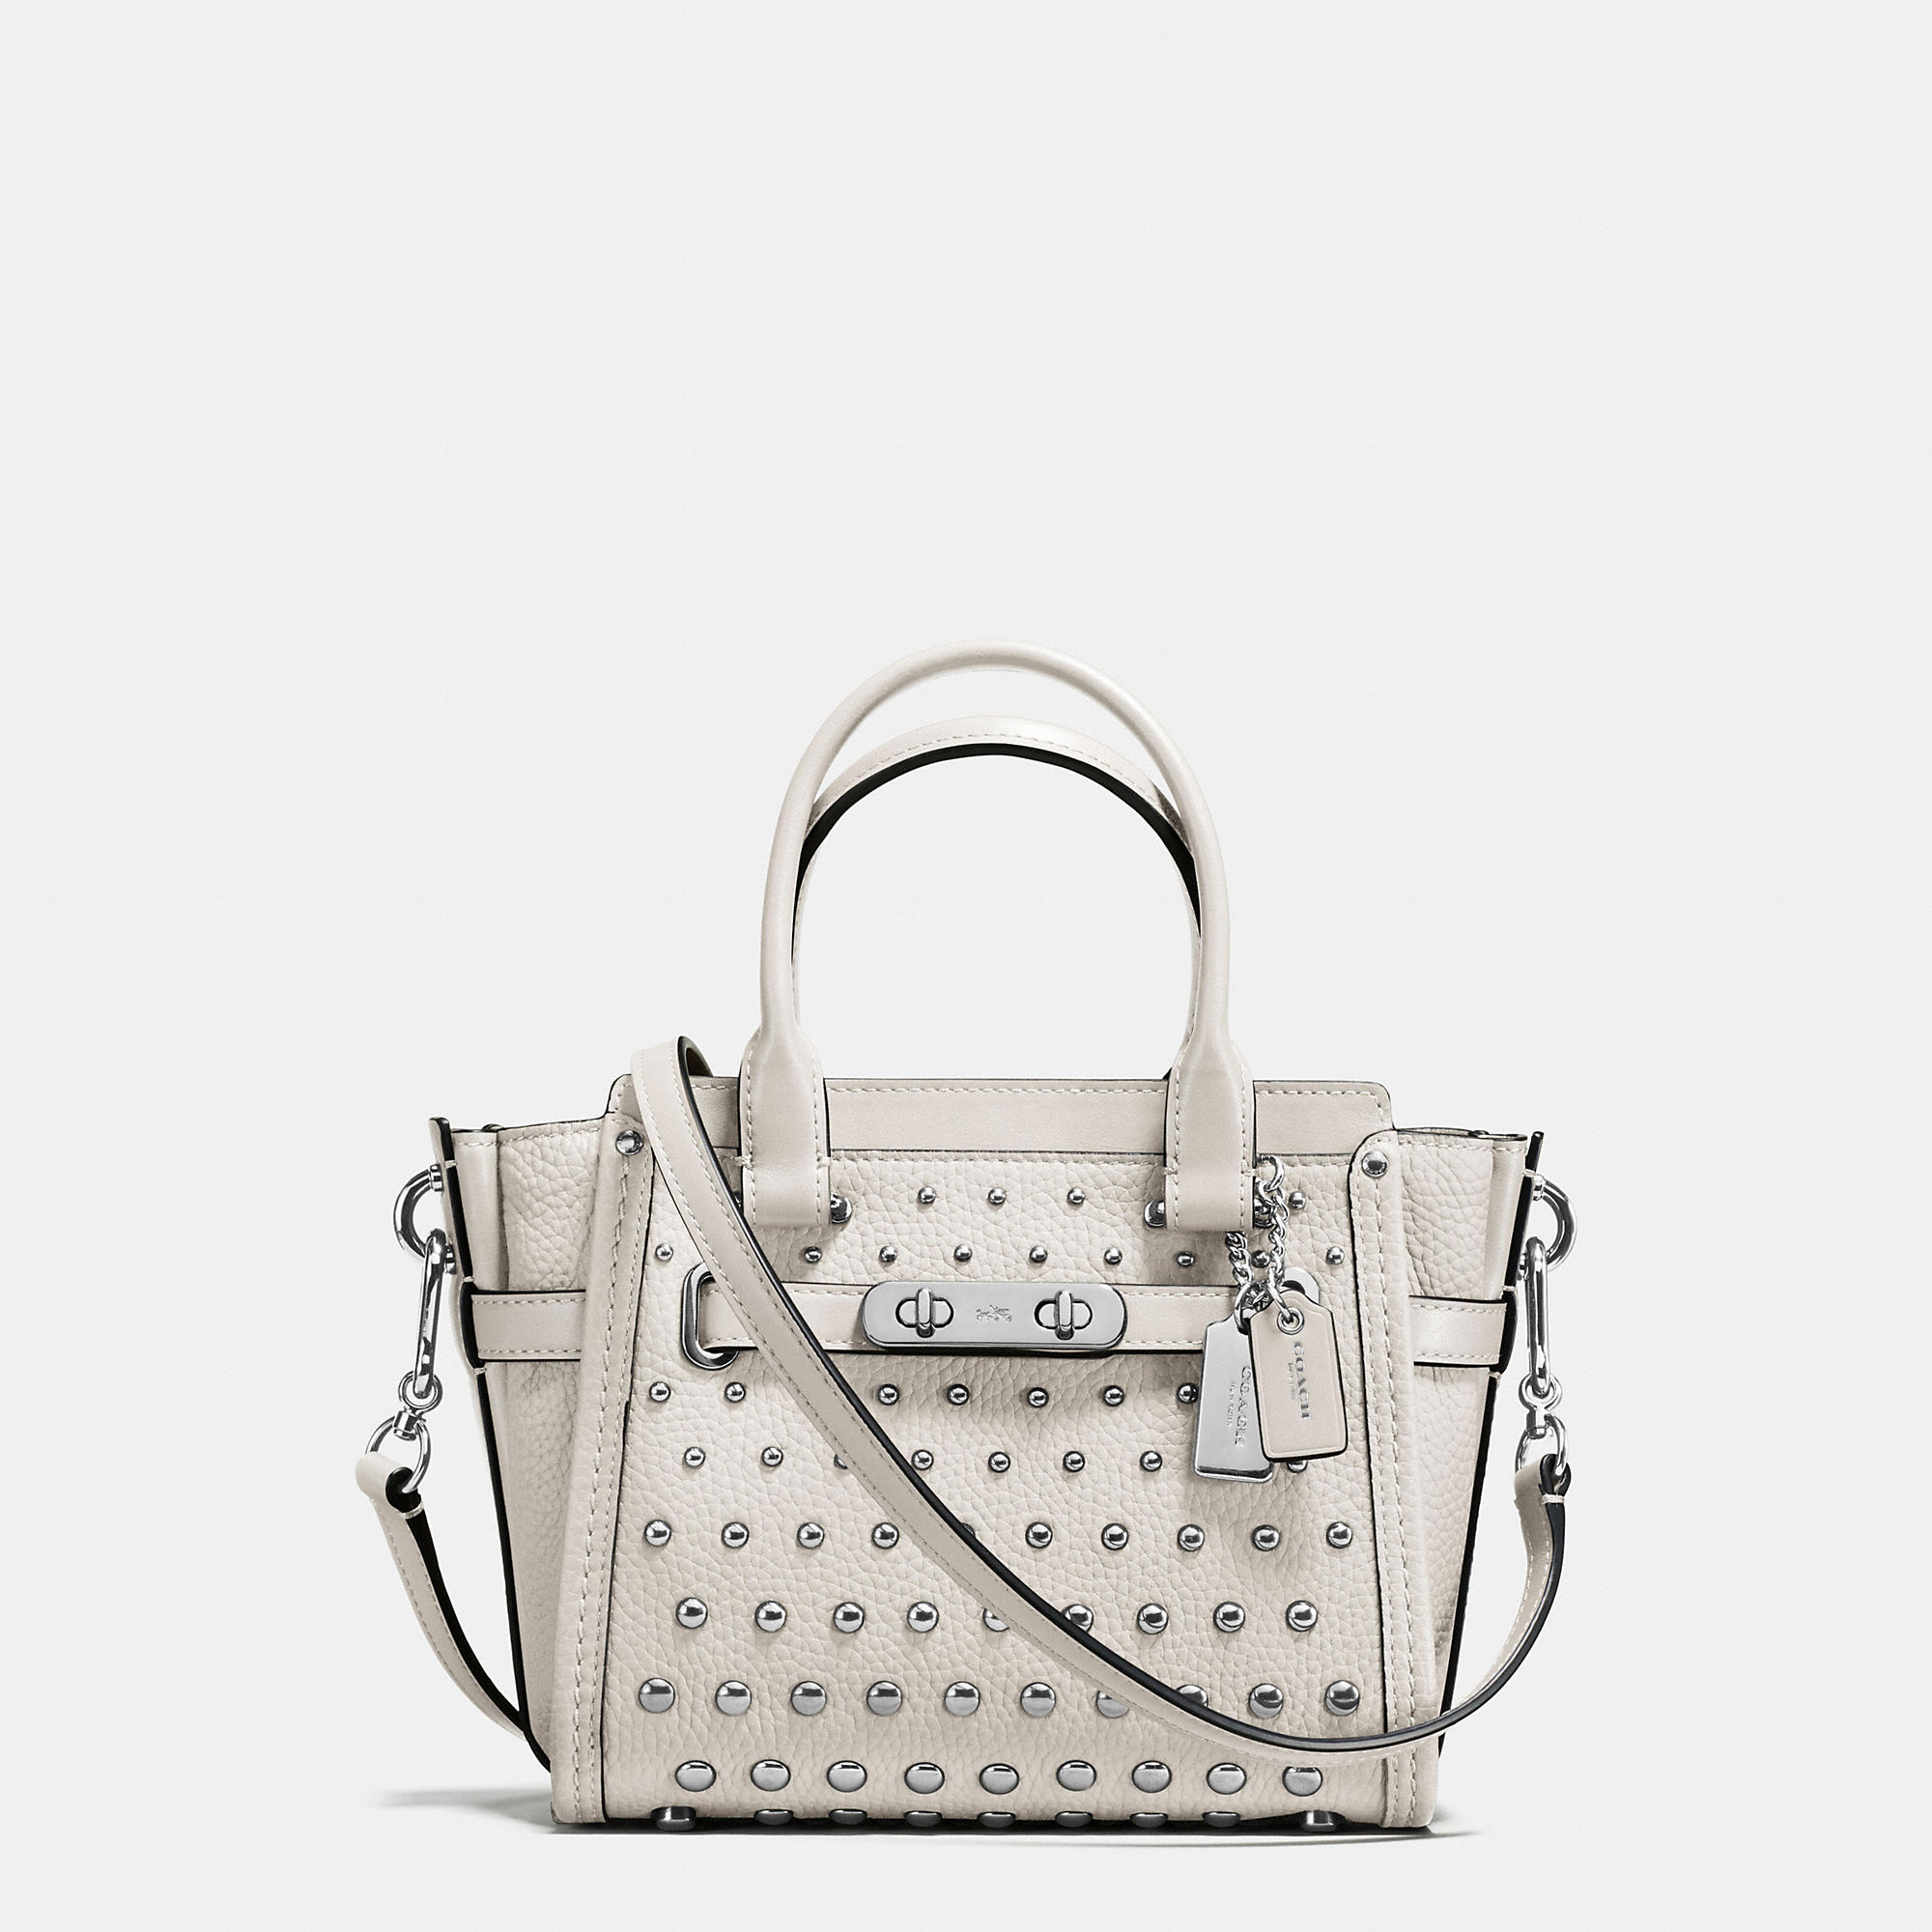 Coach Swagger 21 in Chalk and silver studs